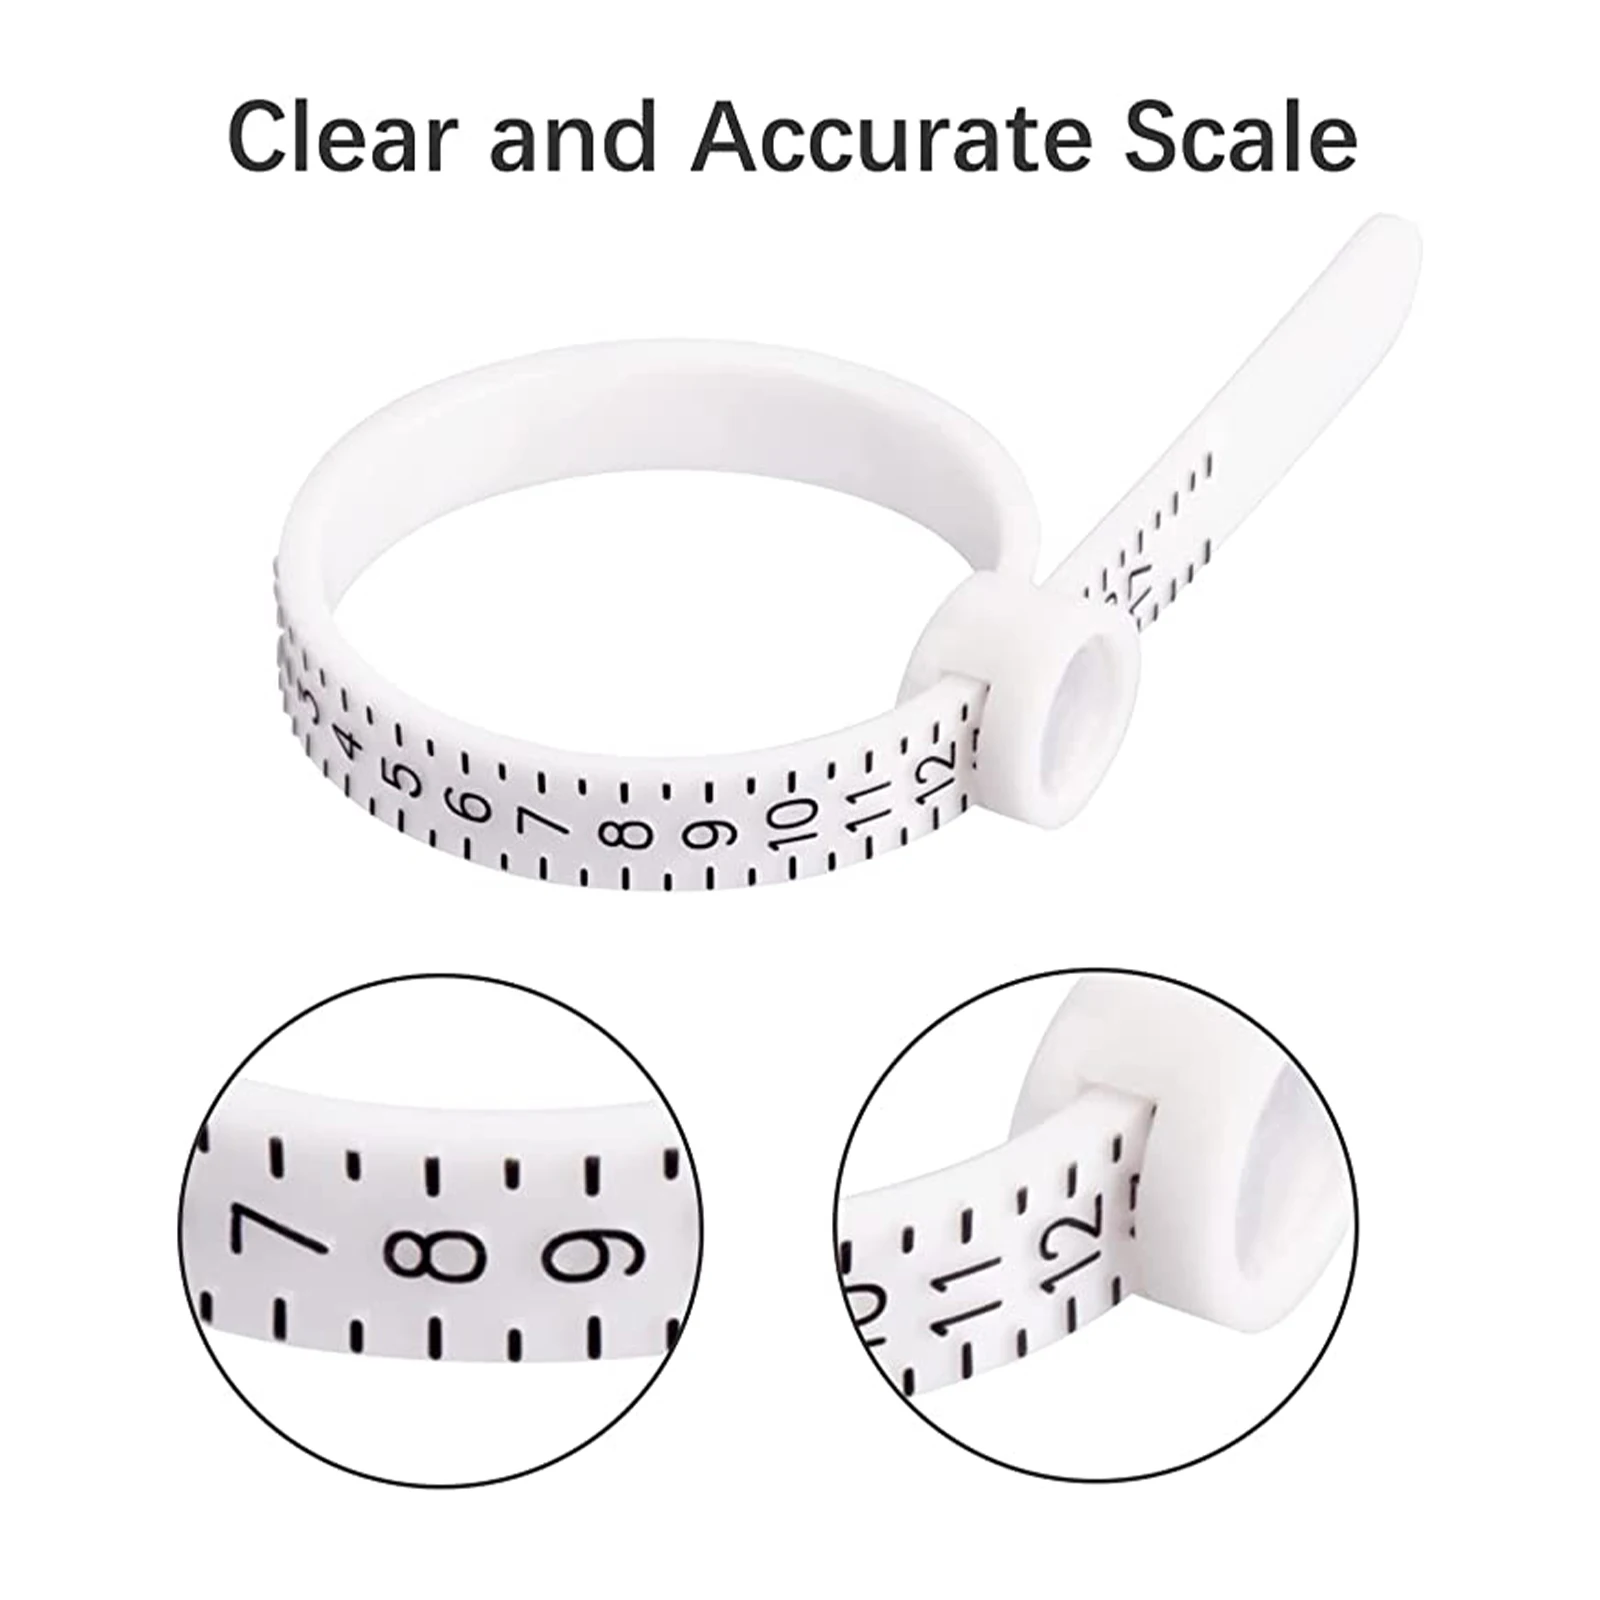  COHEALI 10 Pcs Ring Measurement Ring Sizers for Loose Rings  Ring Gauge Sizer Finger Ring Size Guide Ring Adjuster Tape Measurer Measure  Gauge for Rings Men and Women Belt Jewelry Plastic 